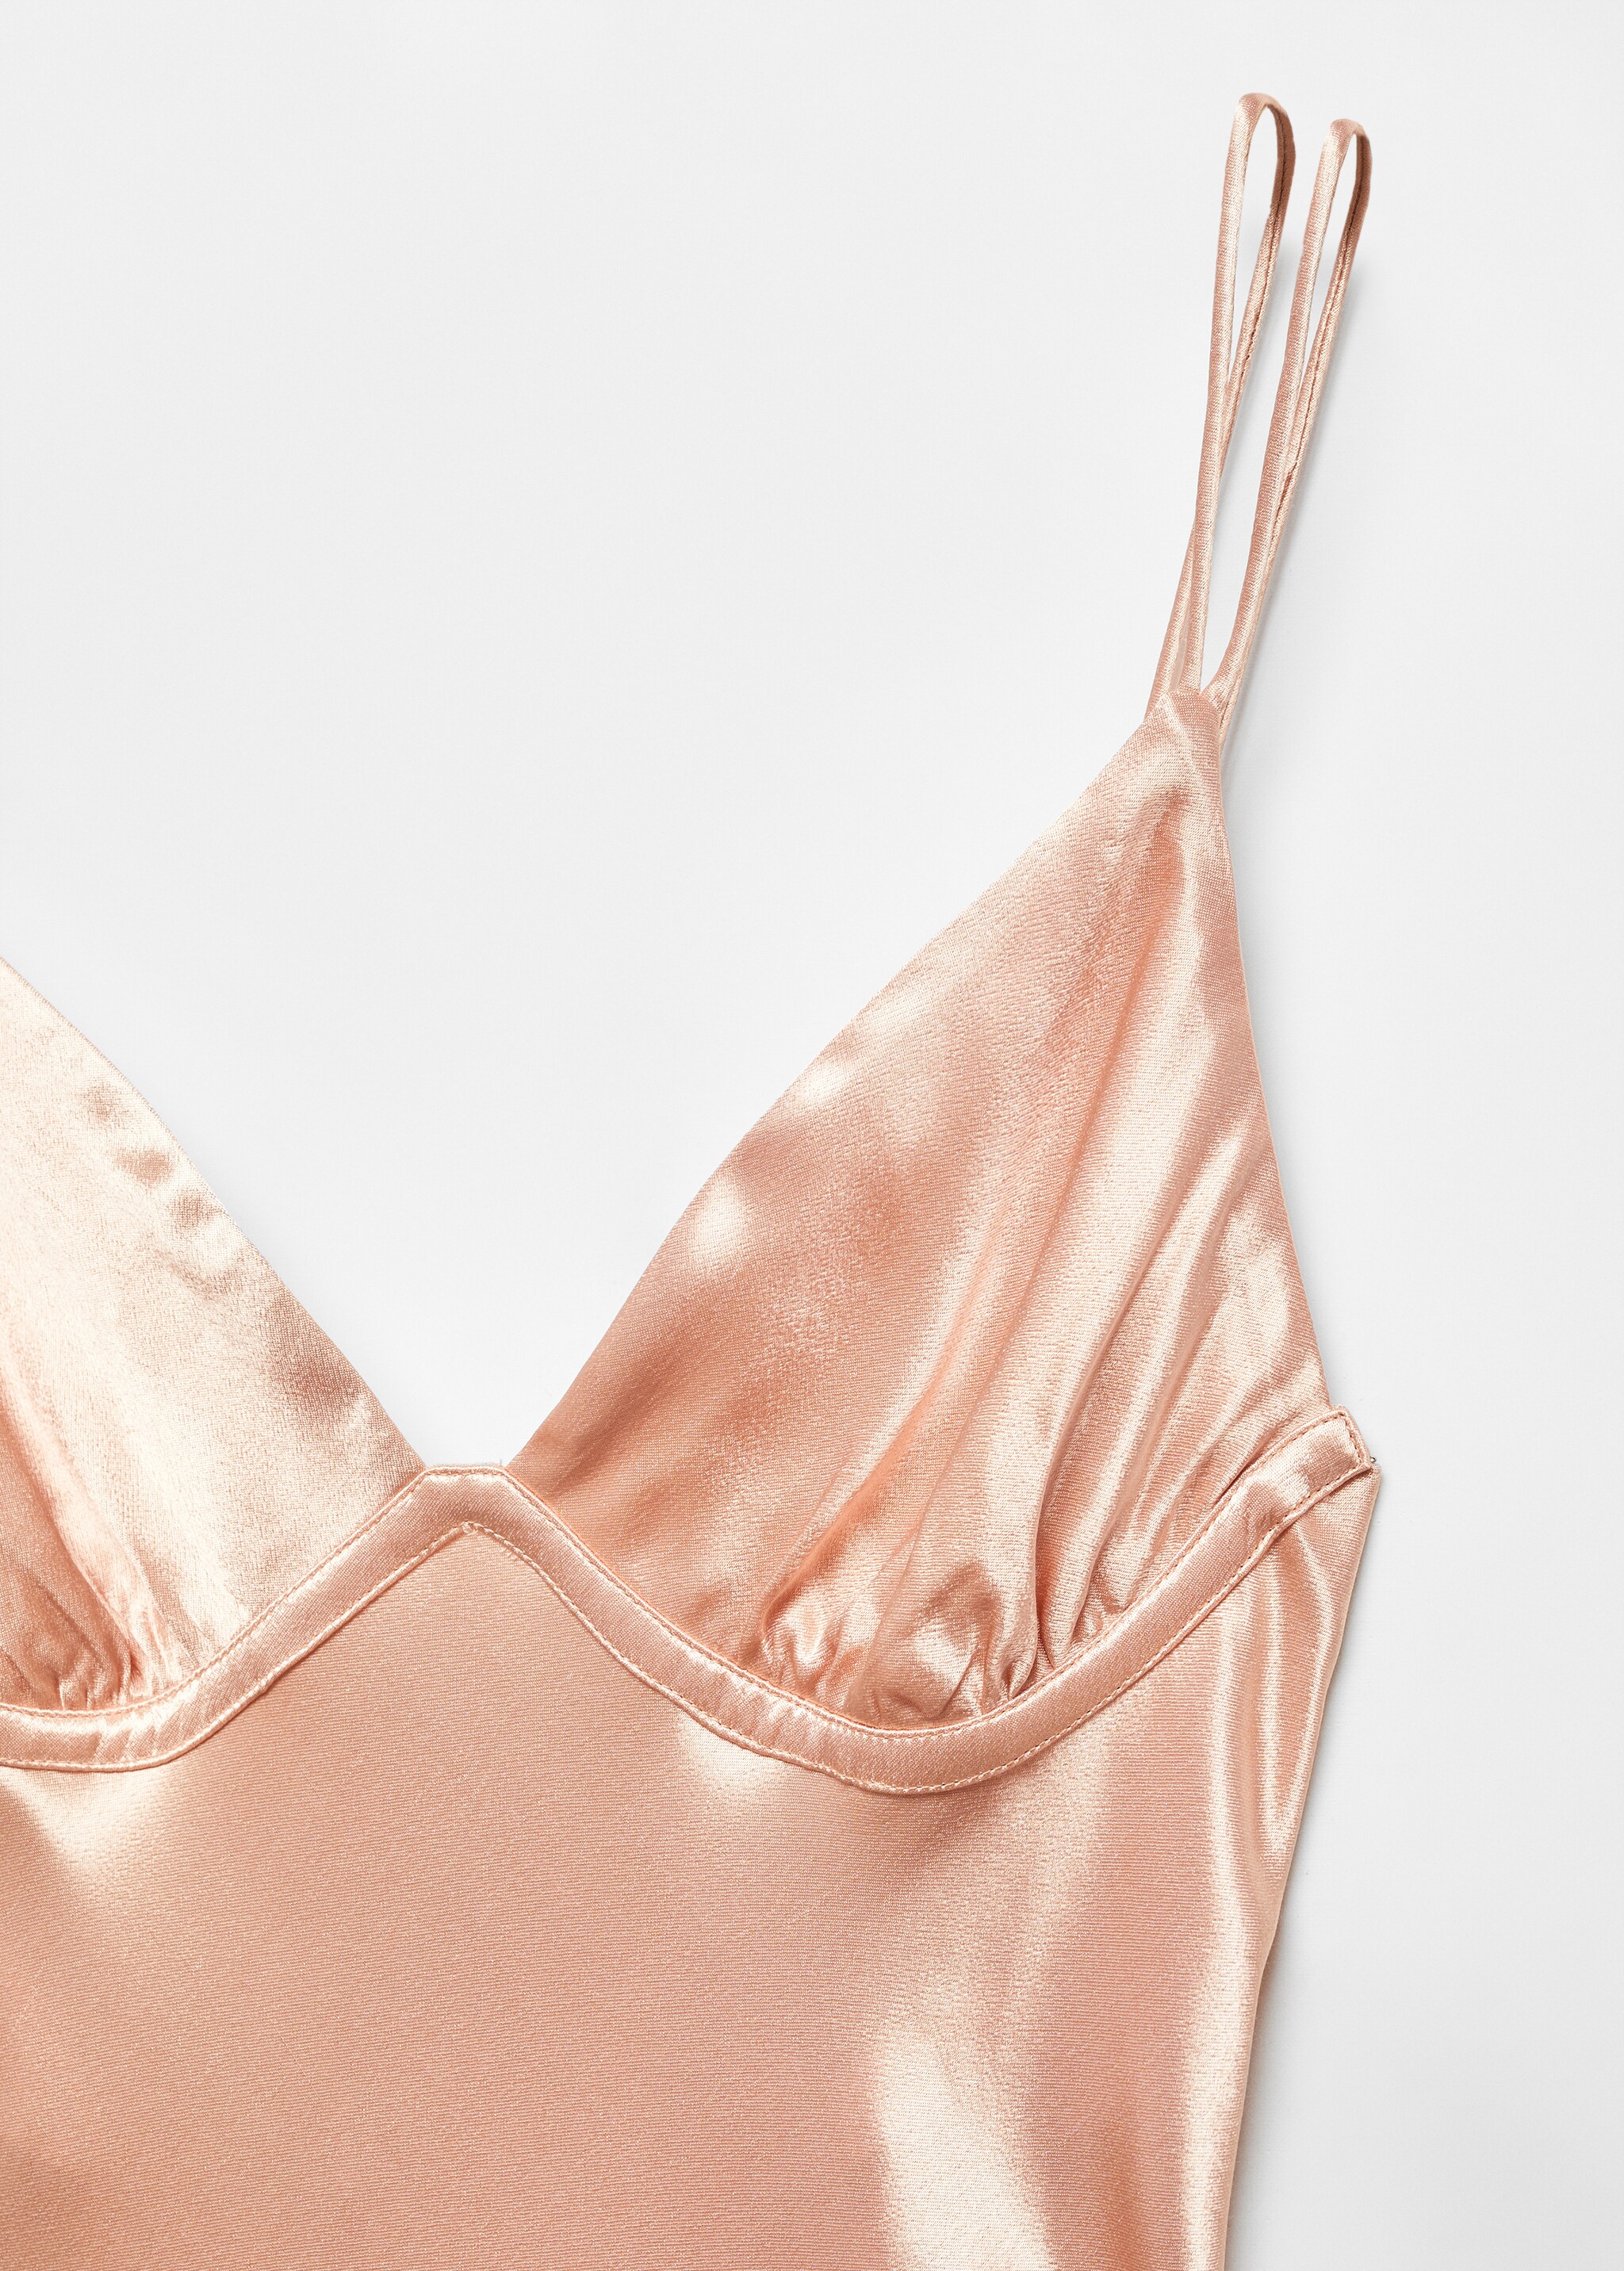 Satin camisole dress - Details of the article 8